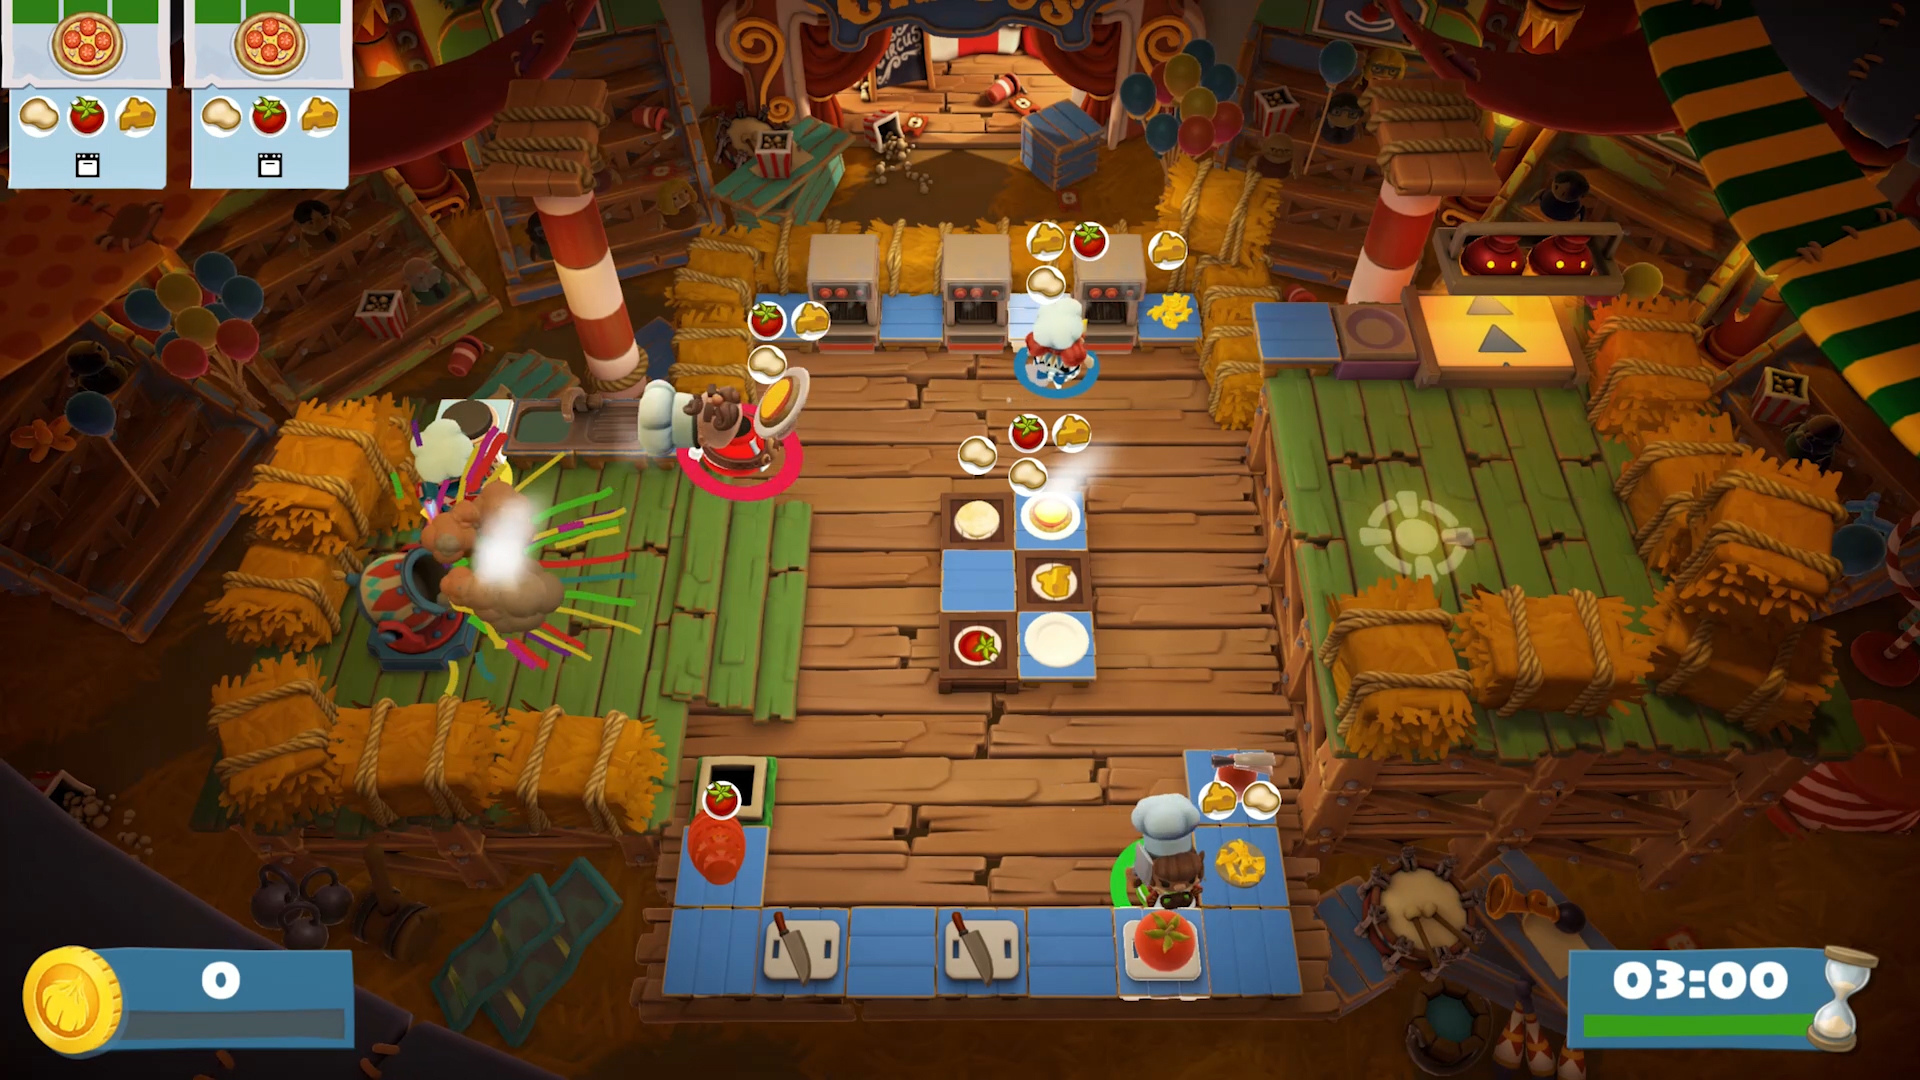 overcooked 2 free epic games